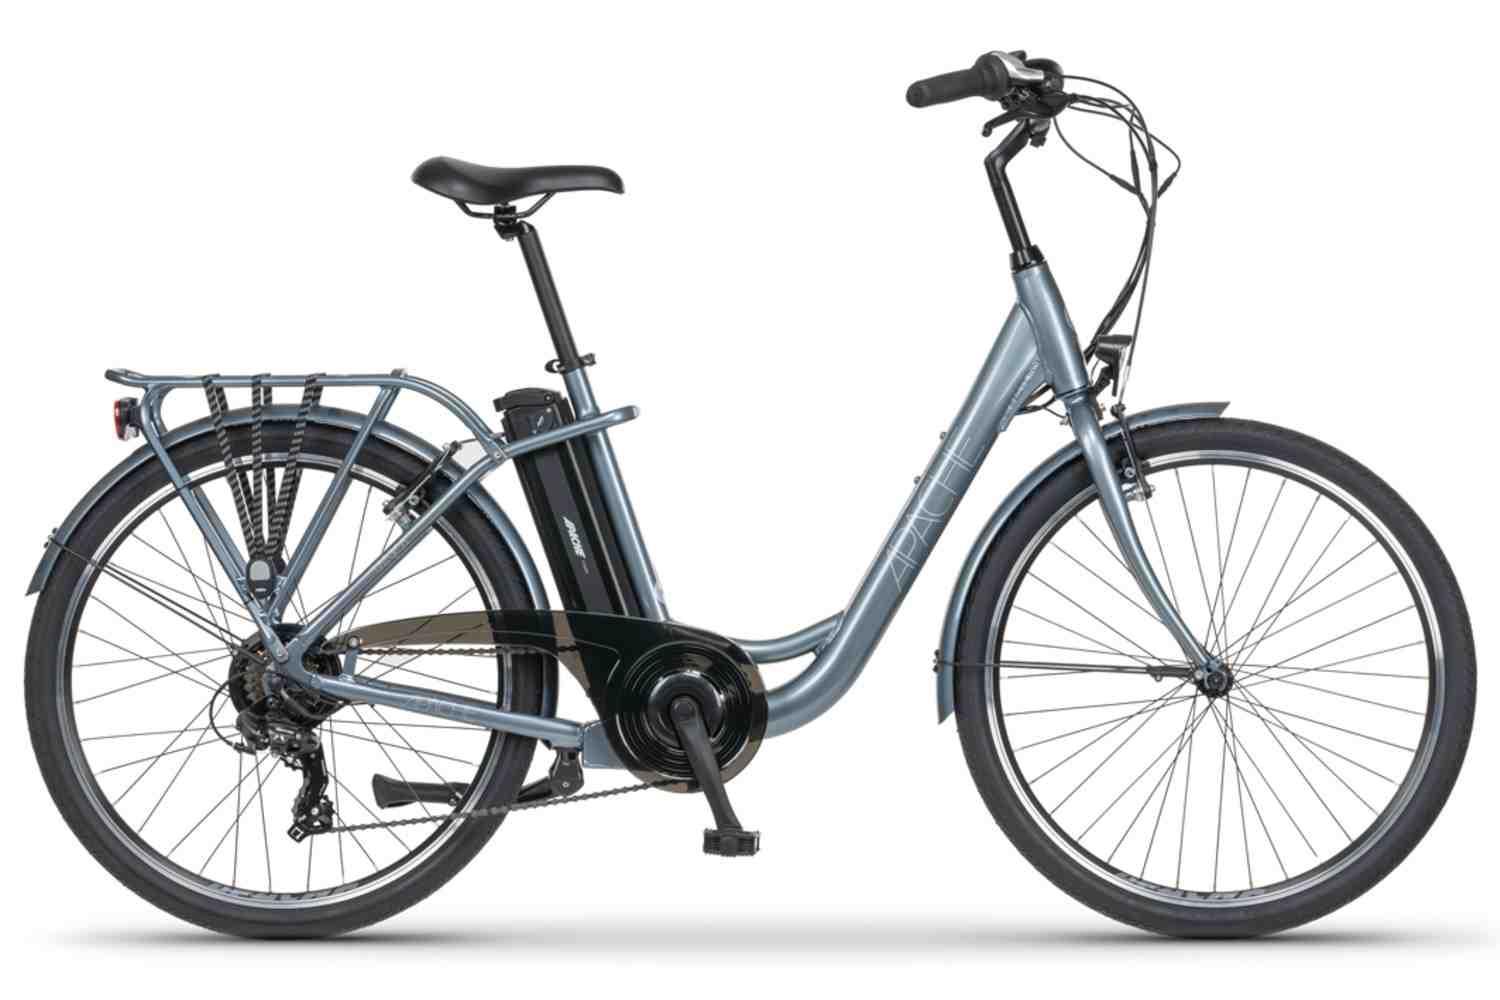 What are the top 5 electric bikes?